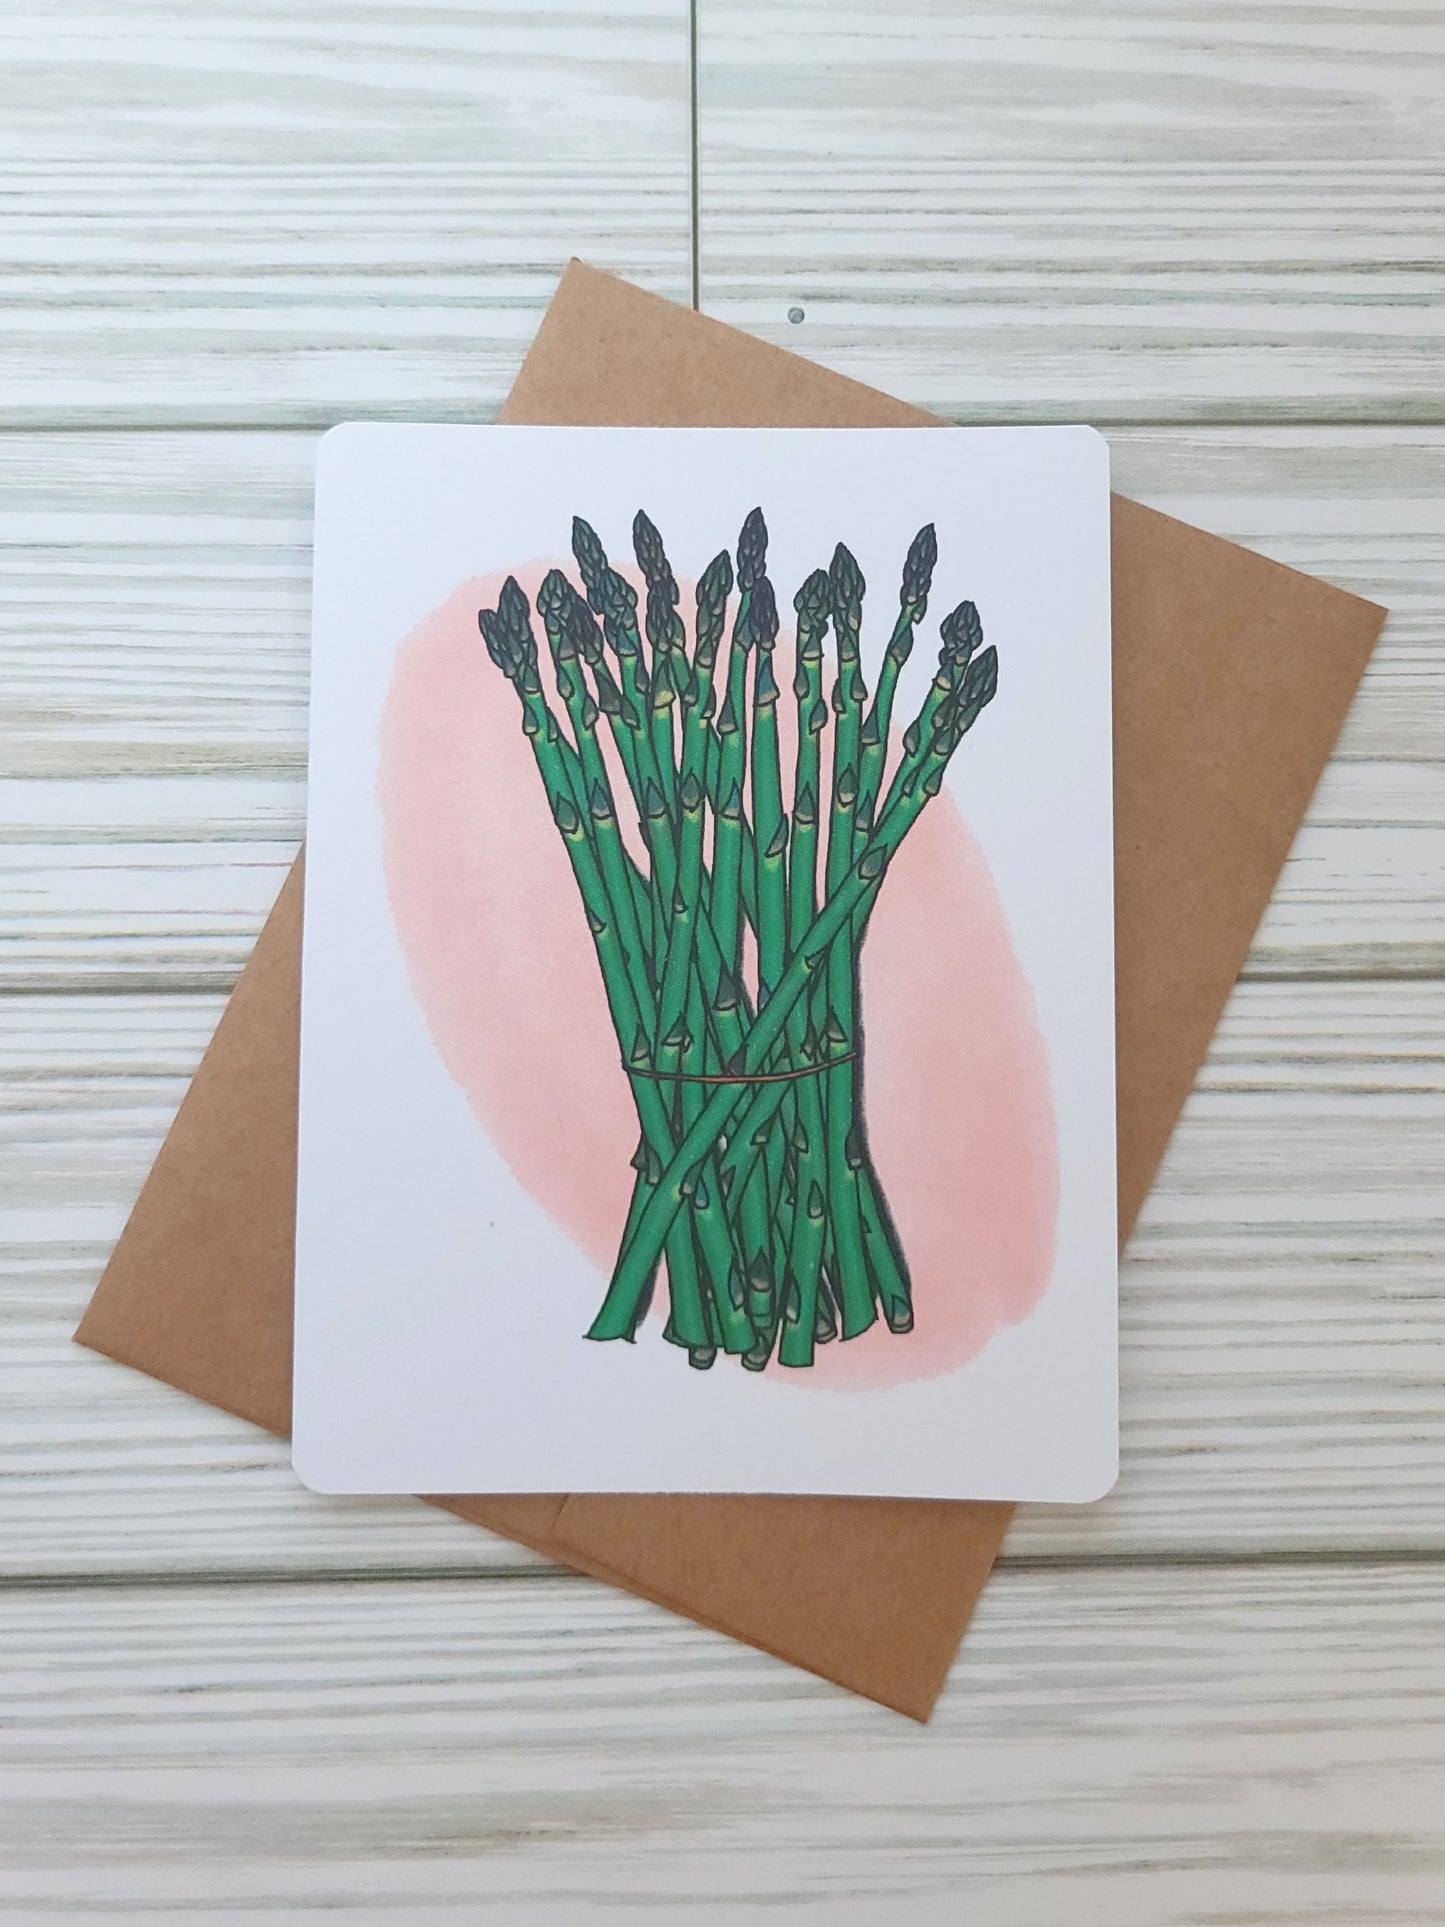 Asparagus Handmade Greeting Card - Recycled Paper and Craft Envelope - Portrait Overhead Shot 